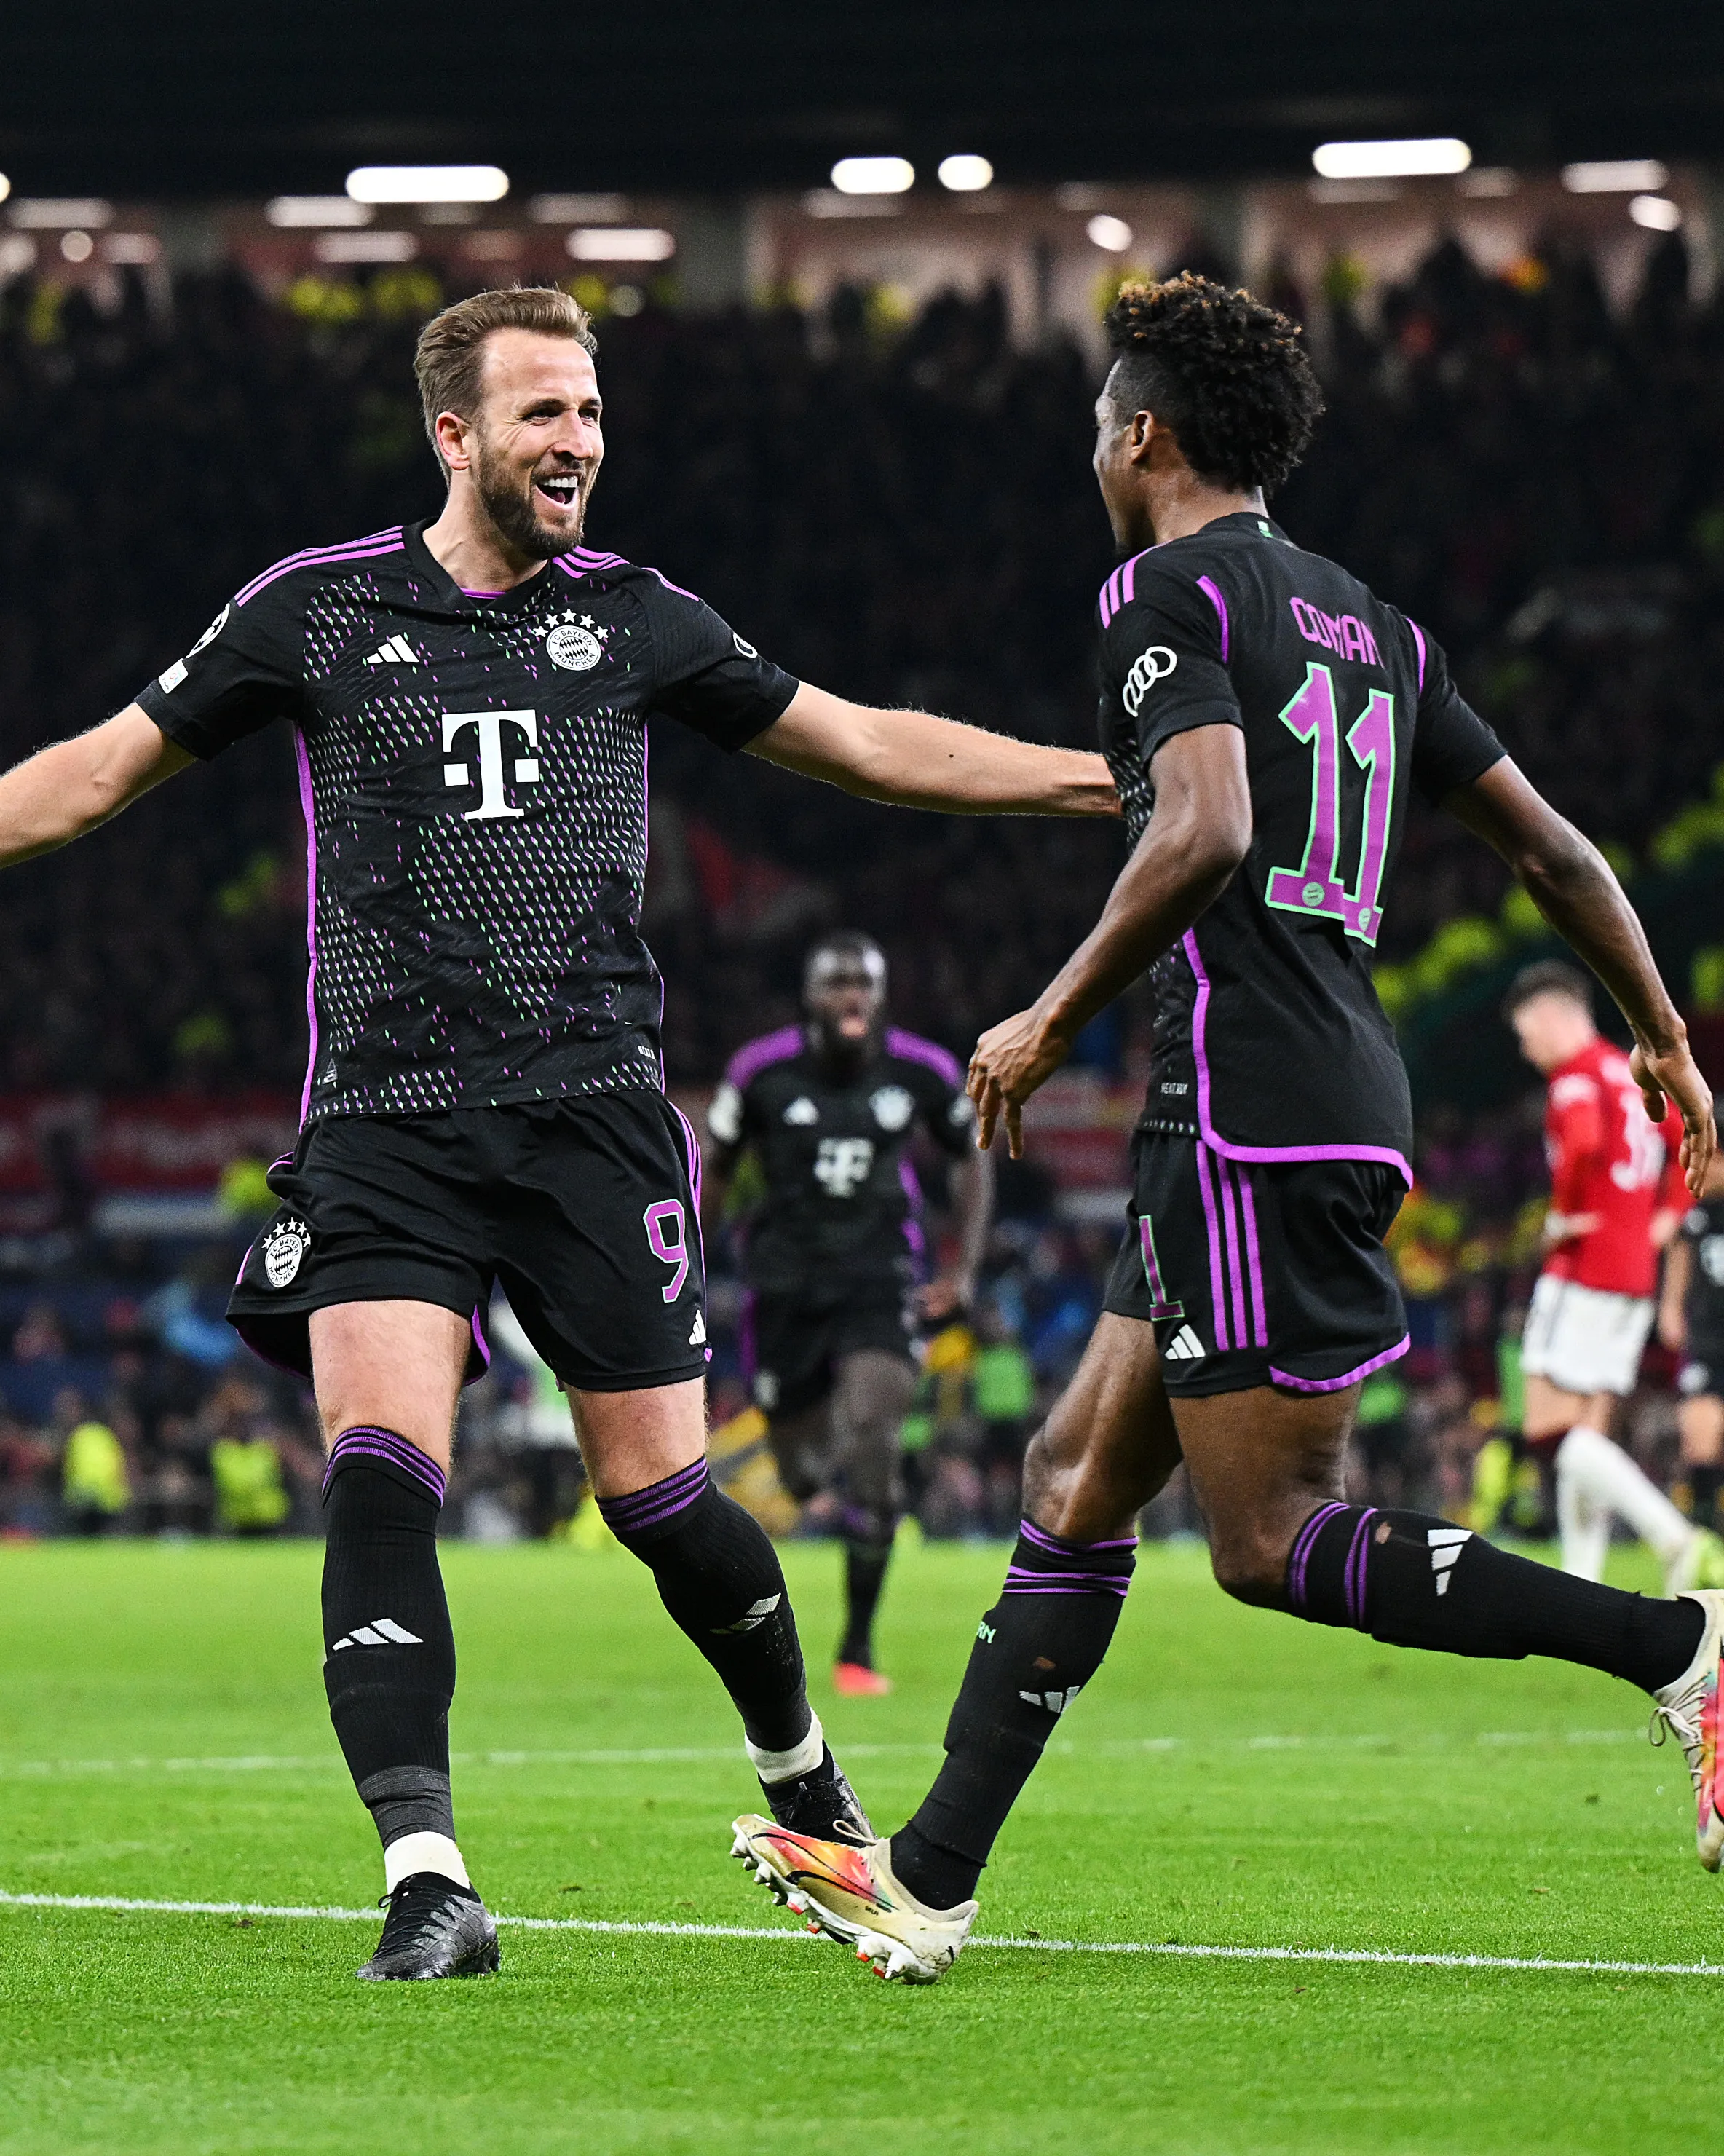 Harry Kane and Coman celebrate the first goal of the Manchester United vs Bayern Munich match in Champions League.  Image | UEFA